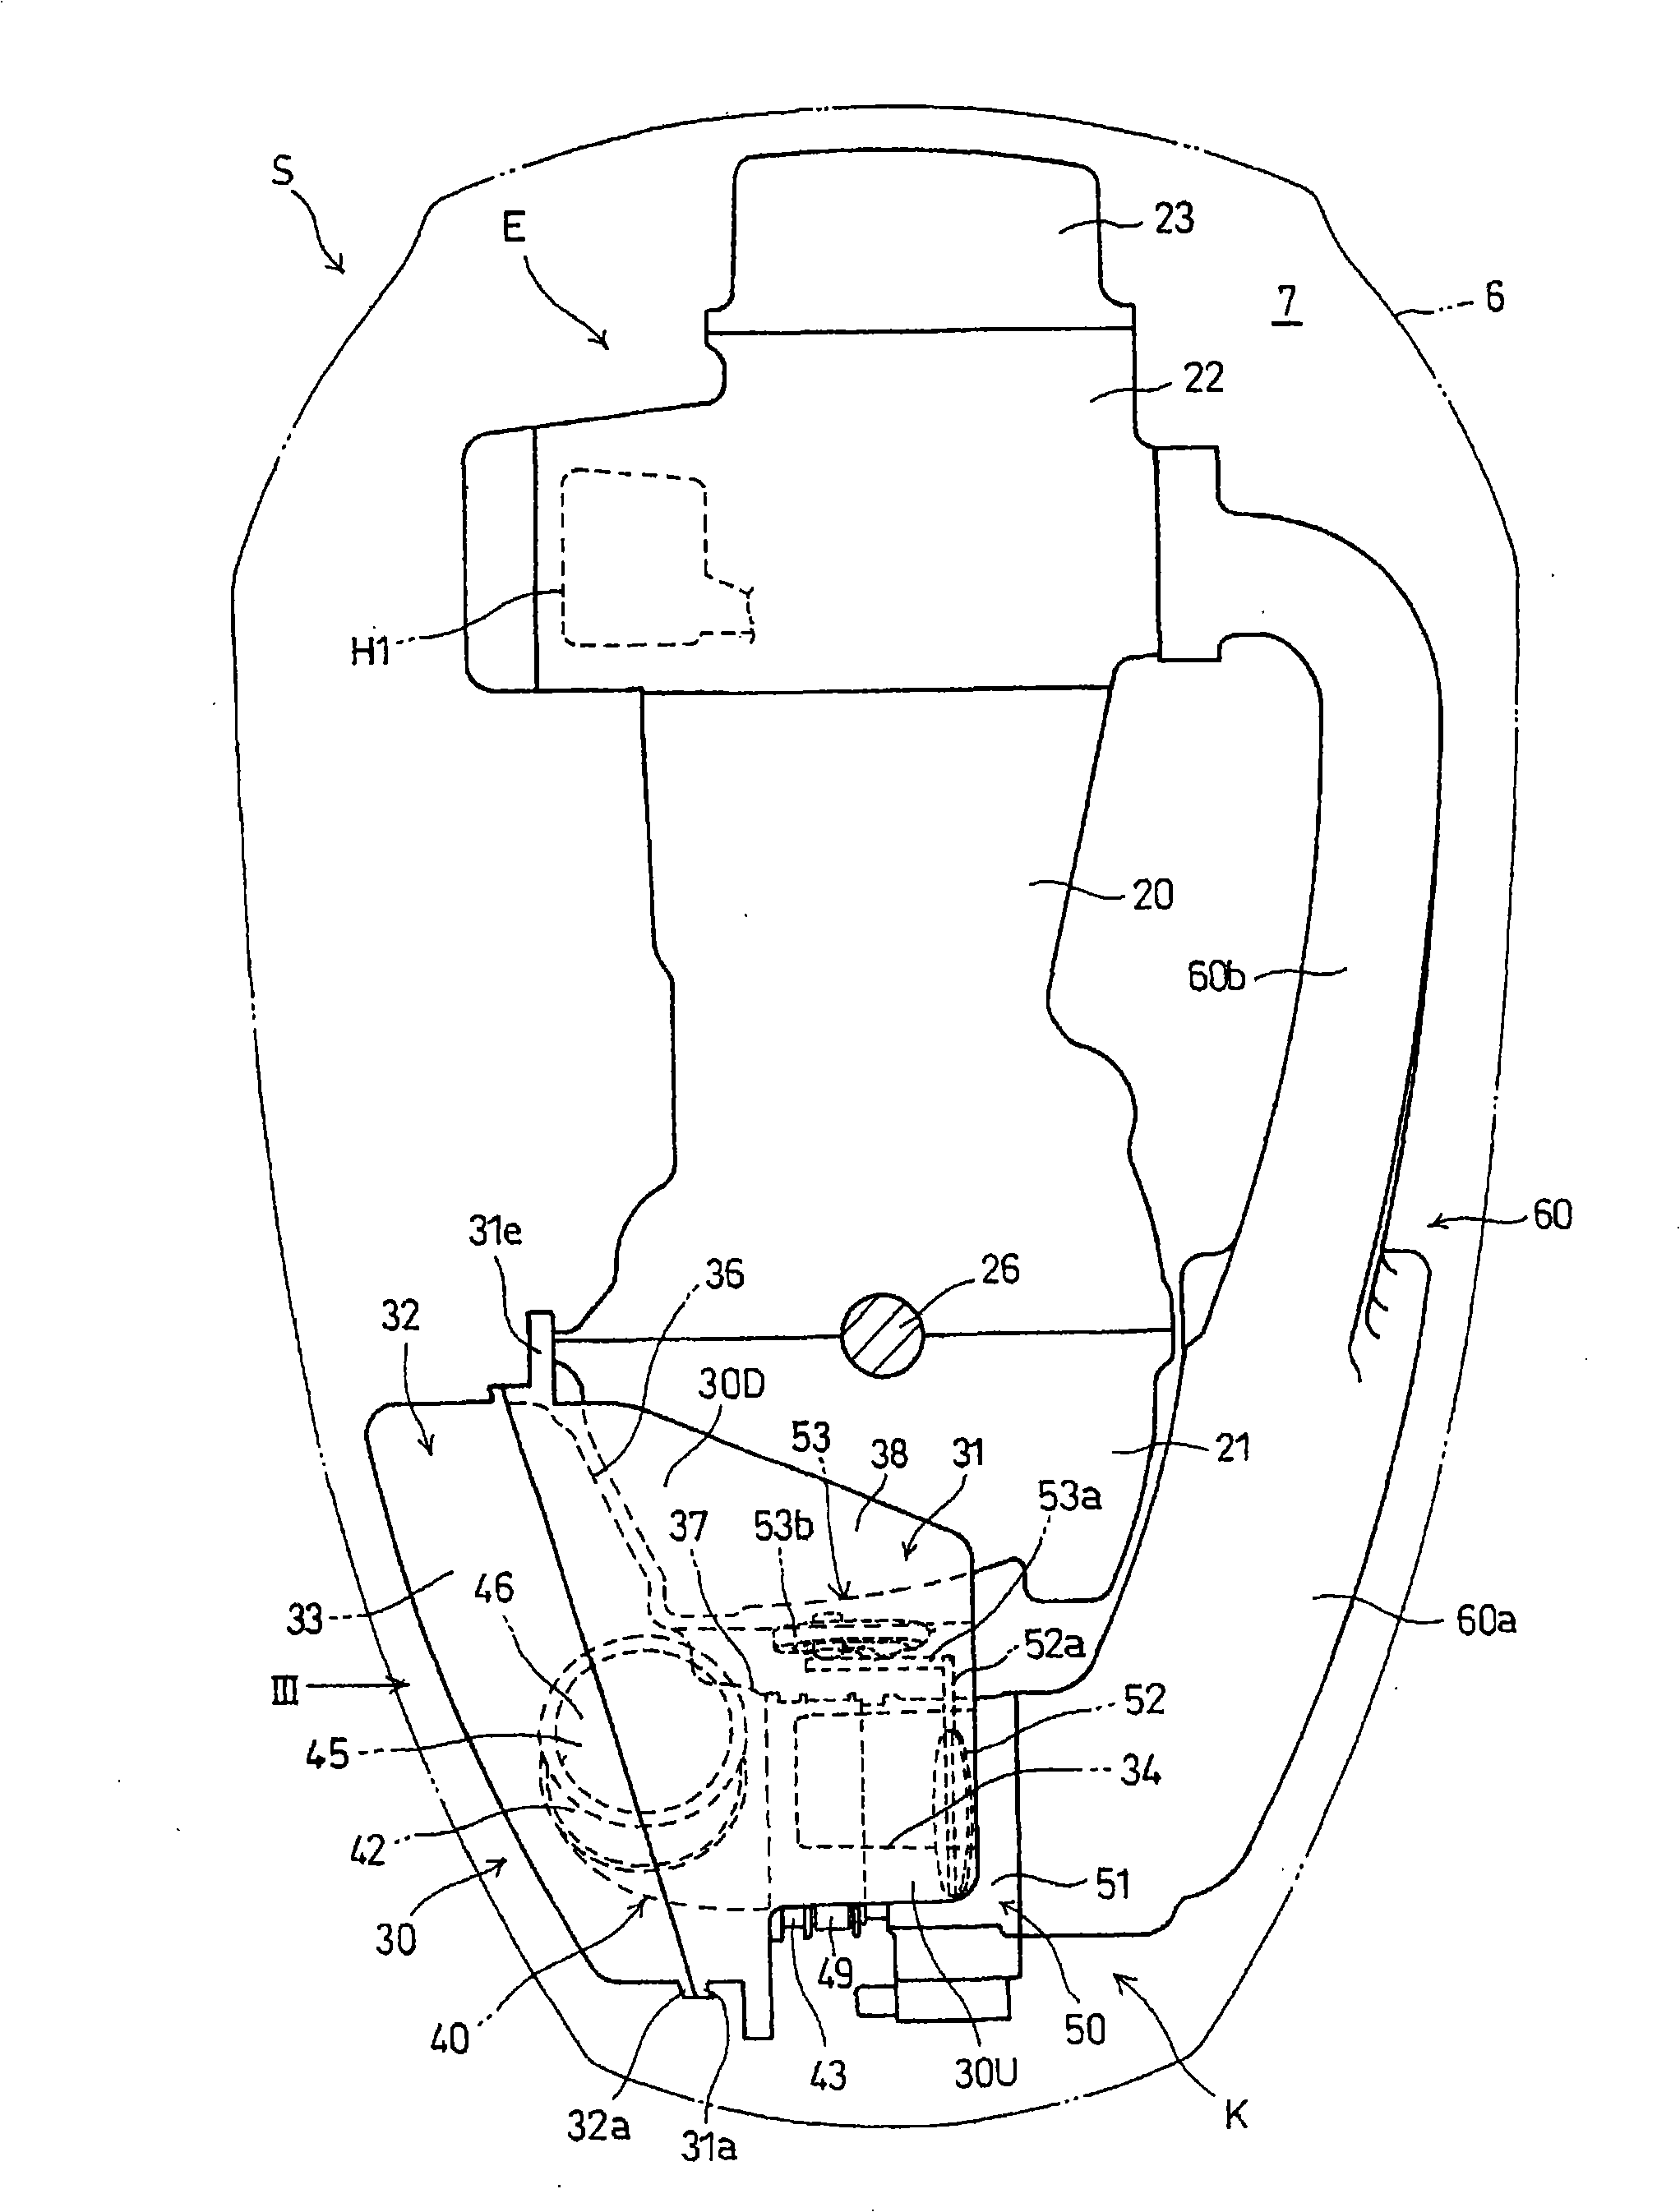 Internal combustion engine with intake muffler